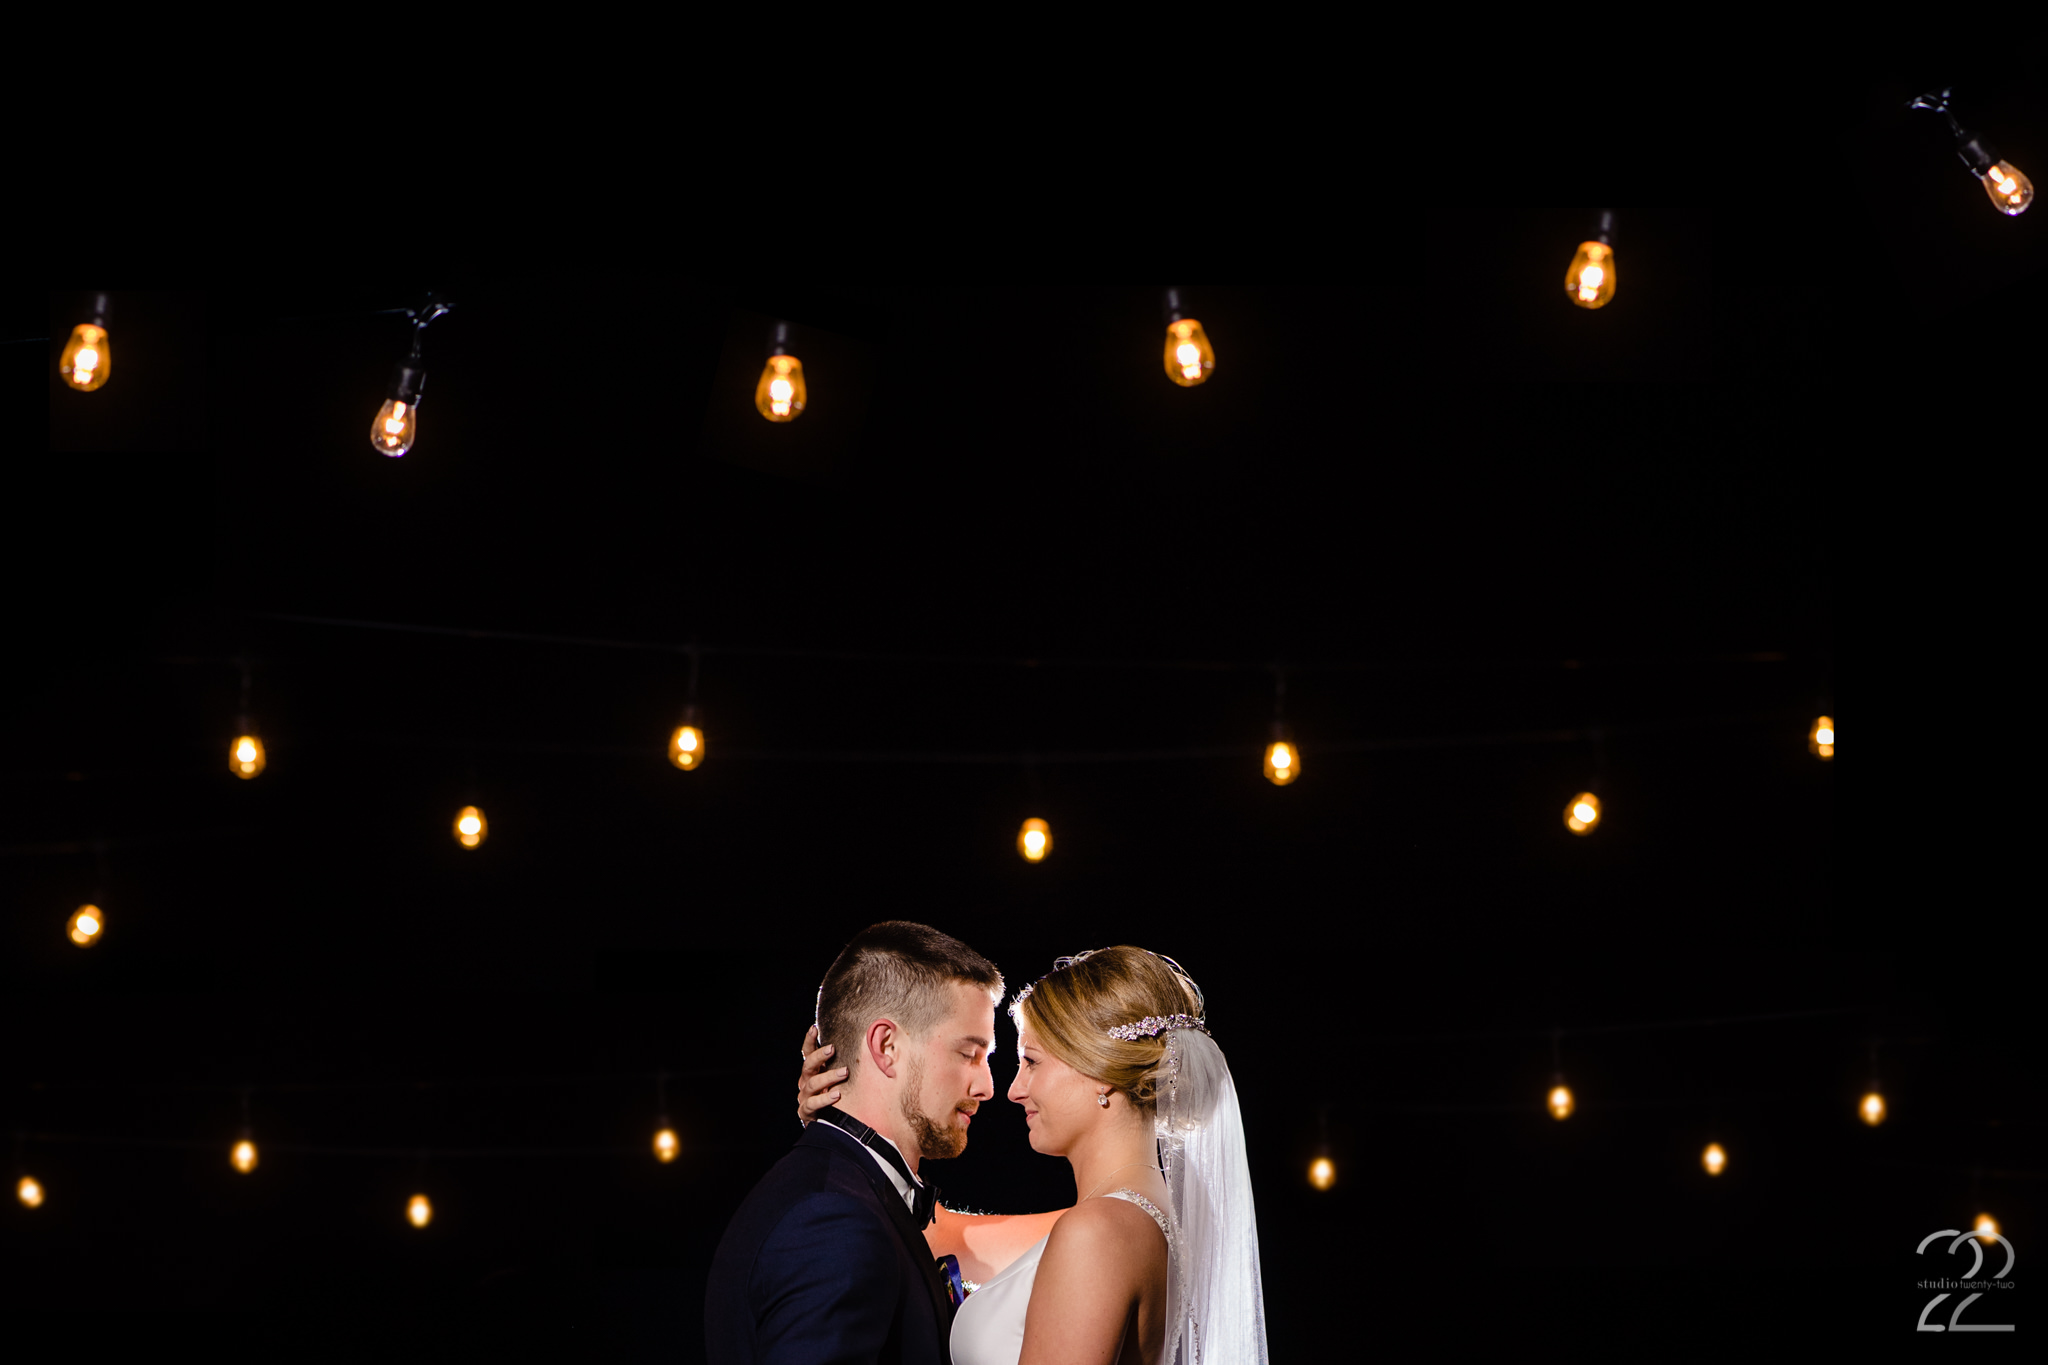 Top of the Market - Downtown Winter Wedding - Studio 22 Photography